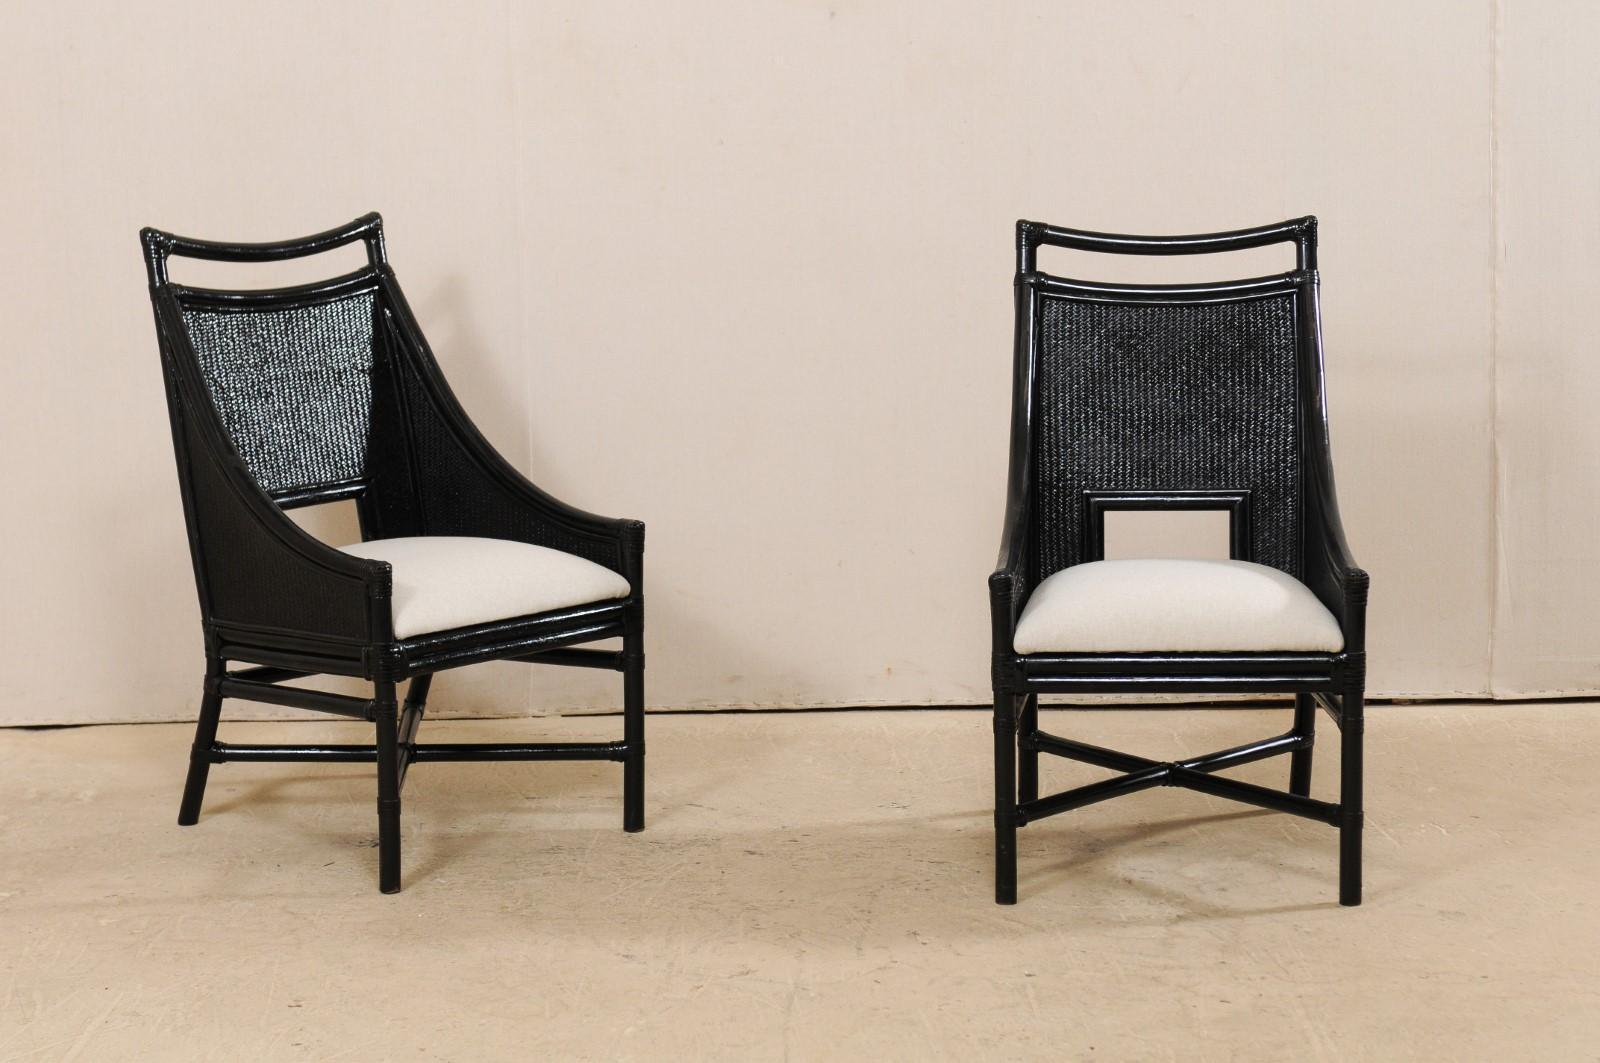 A set of 8 vintage American painted bamboo and cane chairs with upholstered seats. These vintage side chairs have a modern aesthetic to them with their sloping arms, back cut-outs, and shiny black finish. The chair backs have a swagged raised top